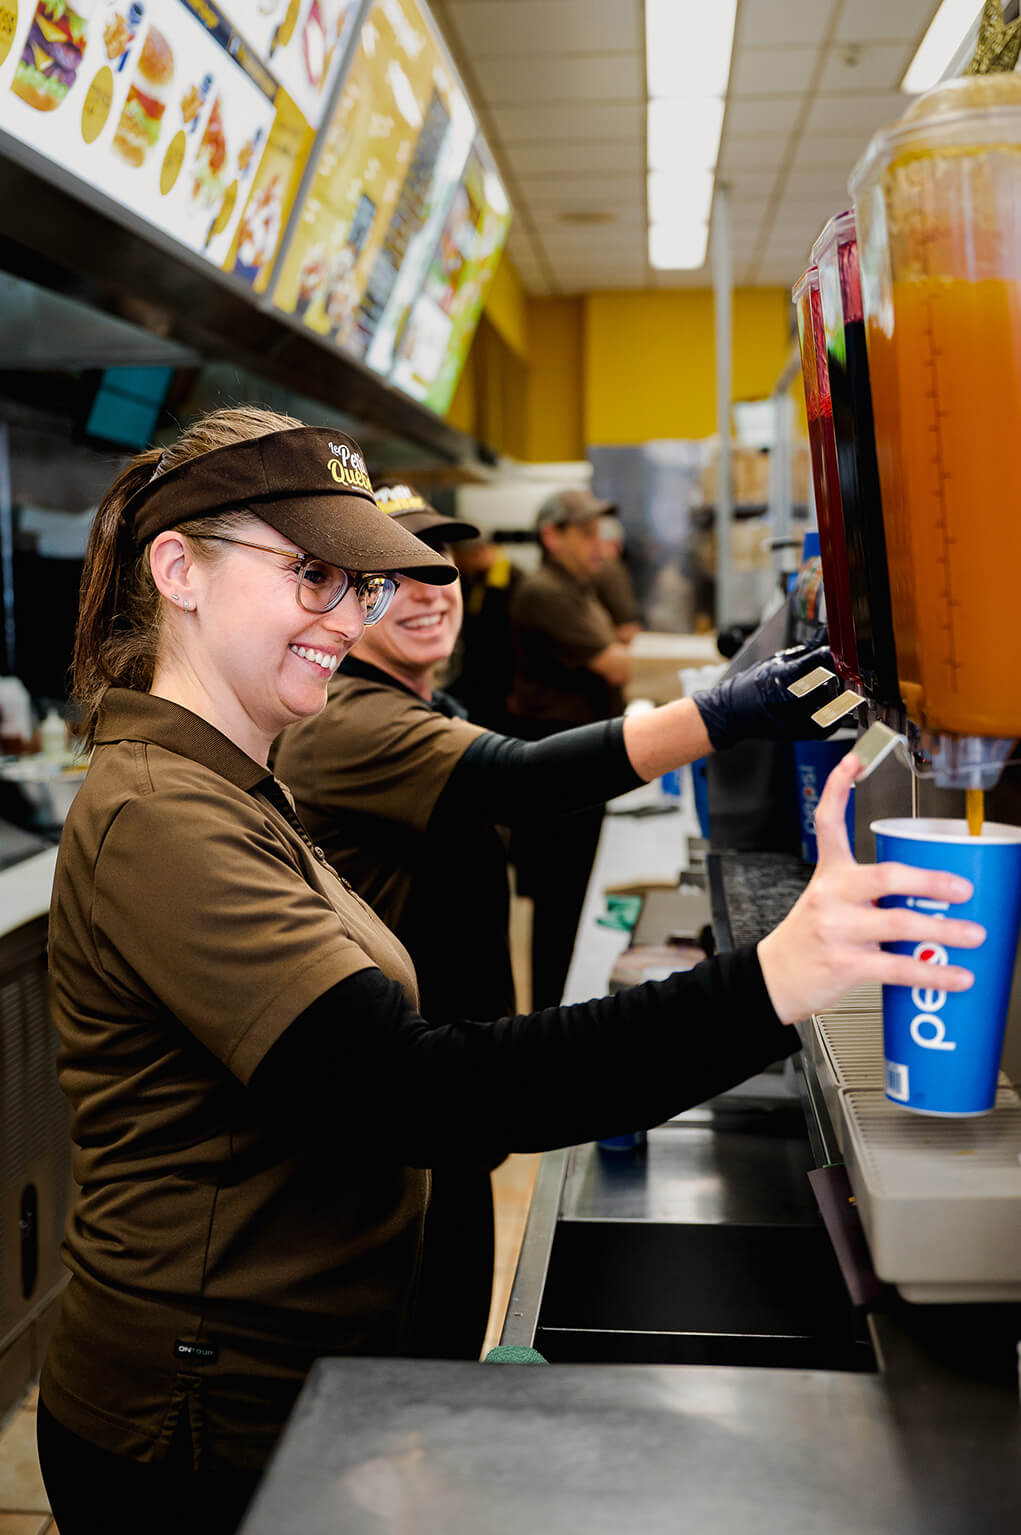 Woman serving drinks in a fast-food restaurant